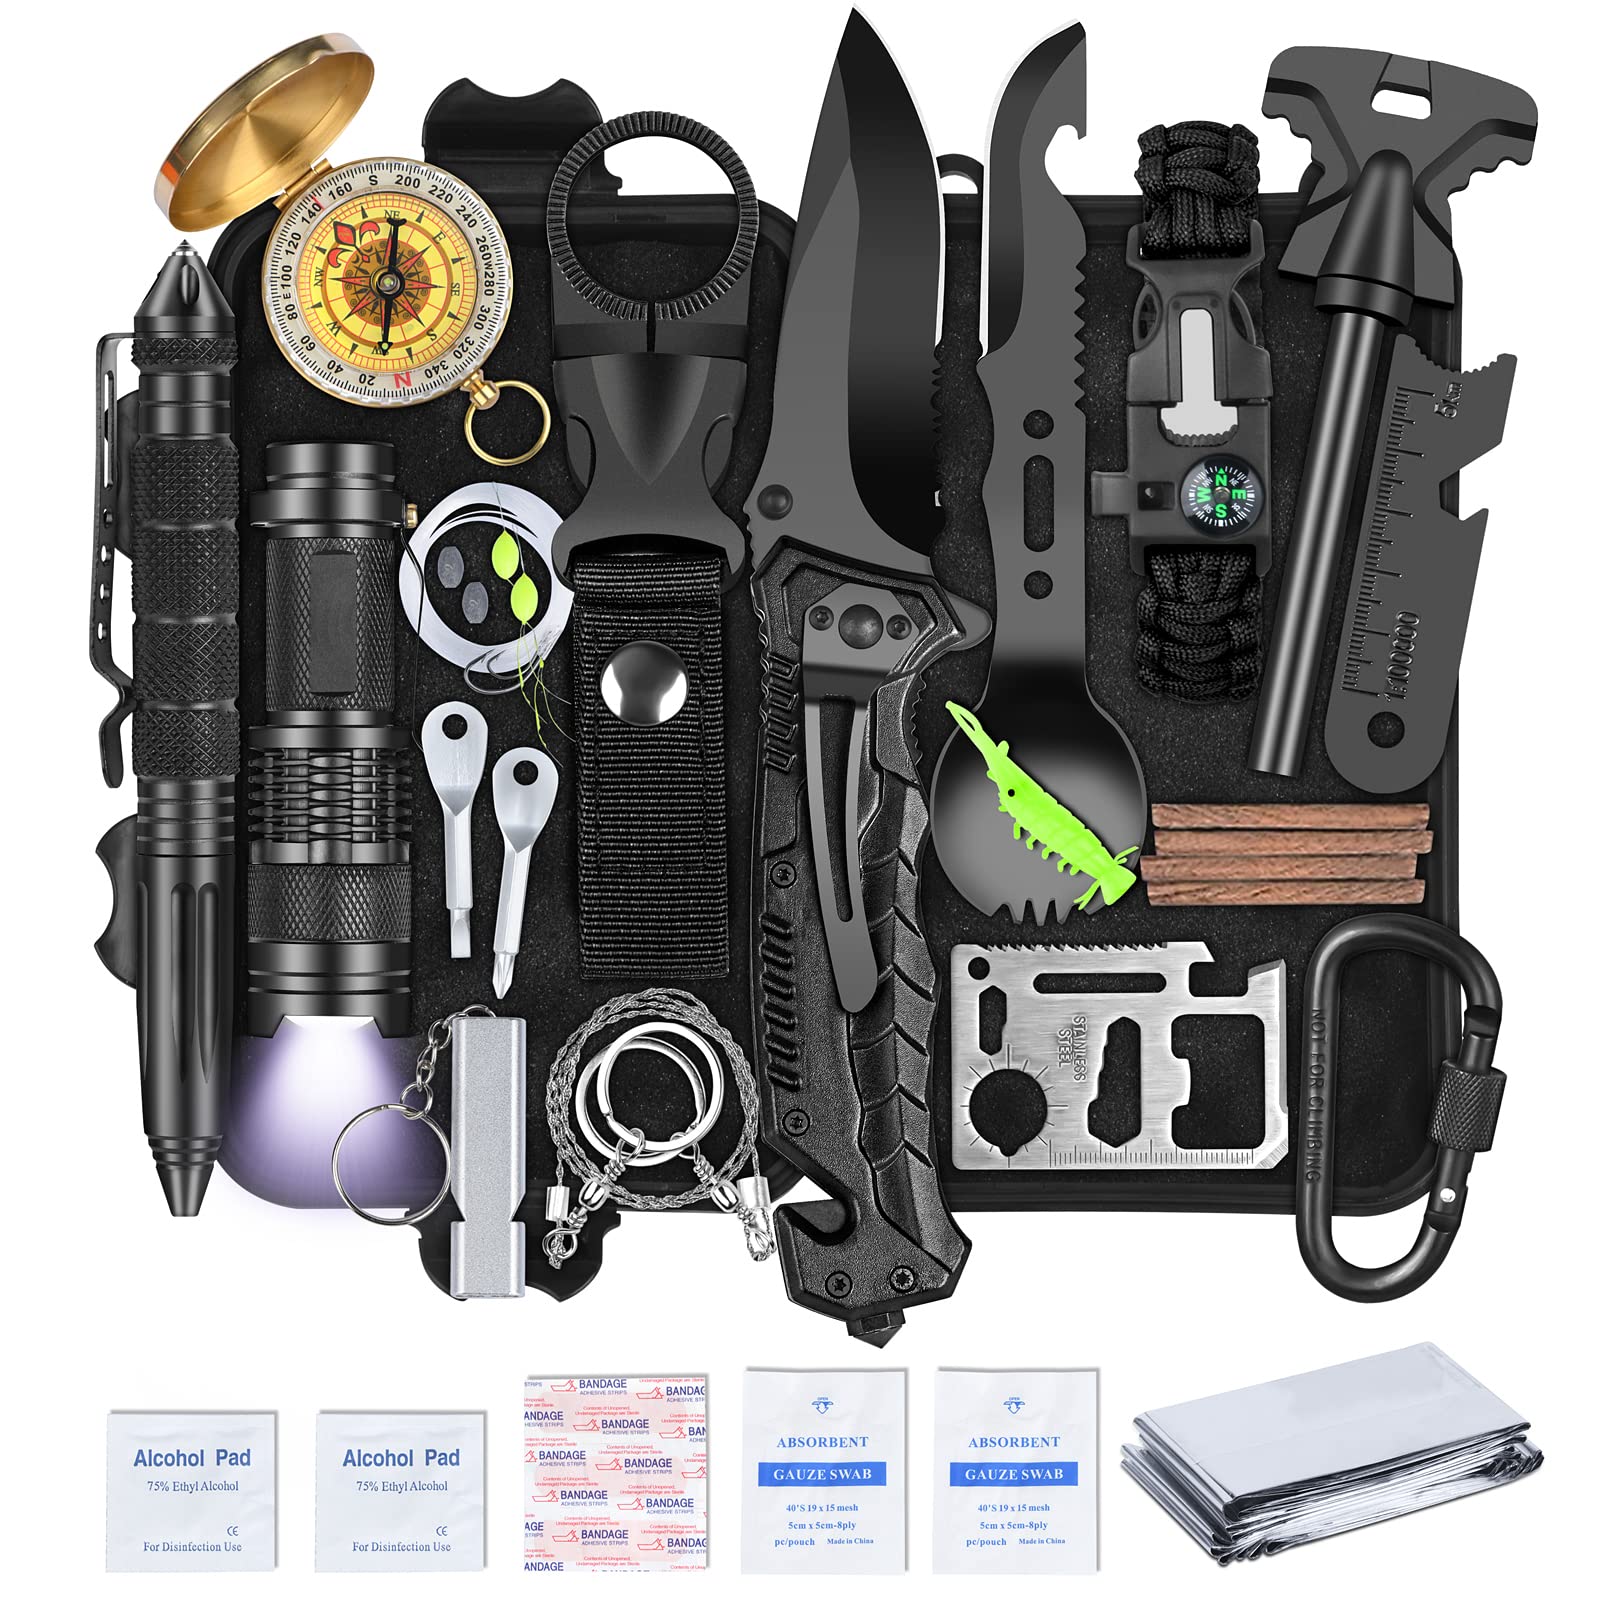 35 in 1 Survival Kit, Gifts for Dad Men Husband, Powerful Survival Gear and  Equipment, Birthday Gifts for Him Teen Boy Boyfriend, Upgraded Cool Gadgets  for Camping, Hiking, Hunting, Fishing